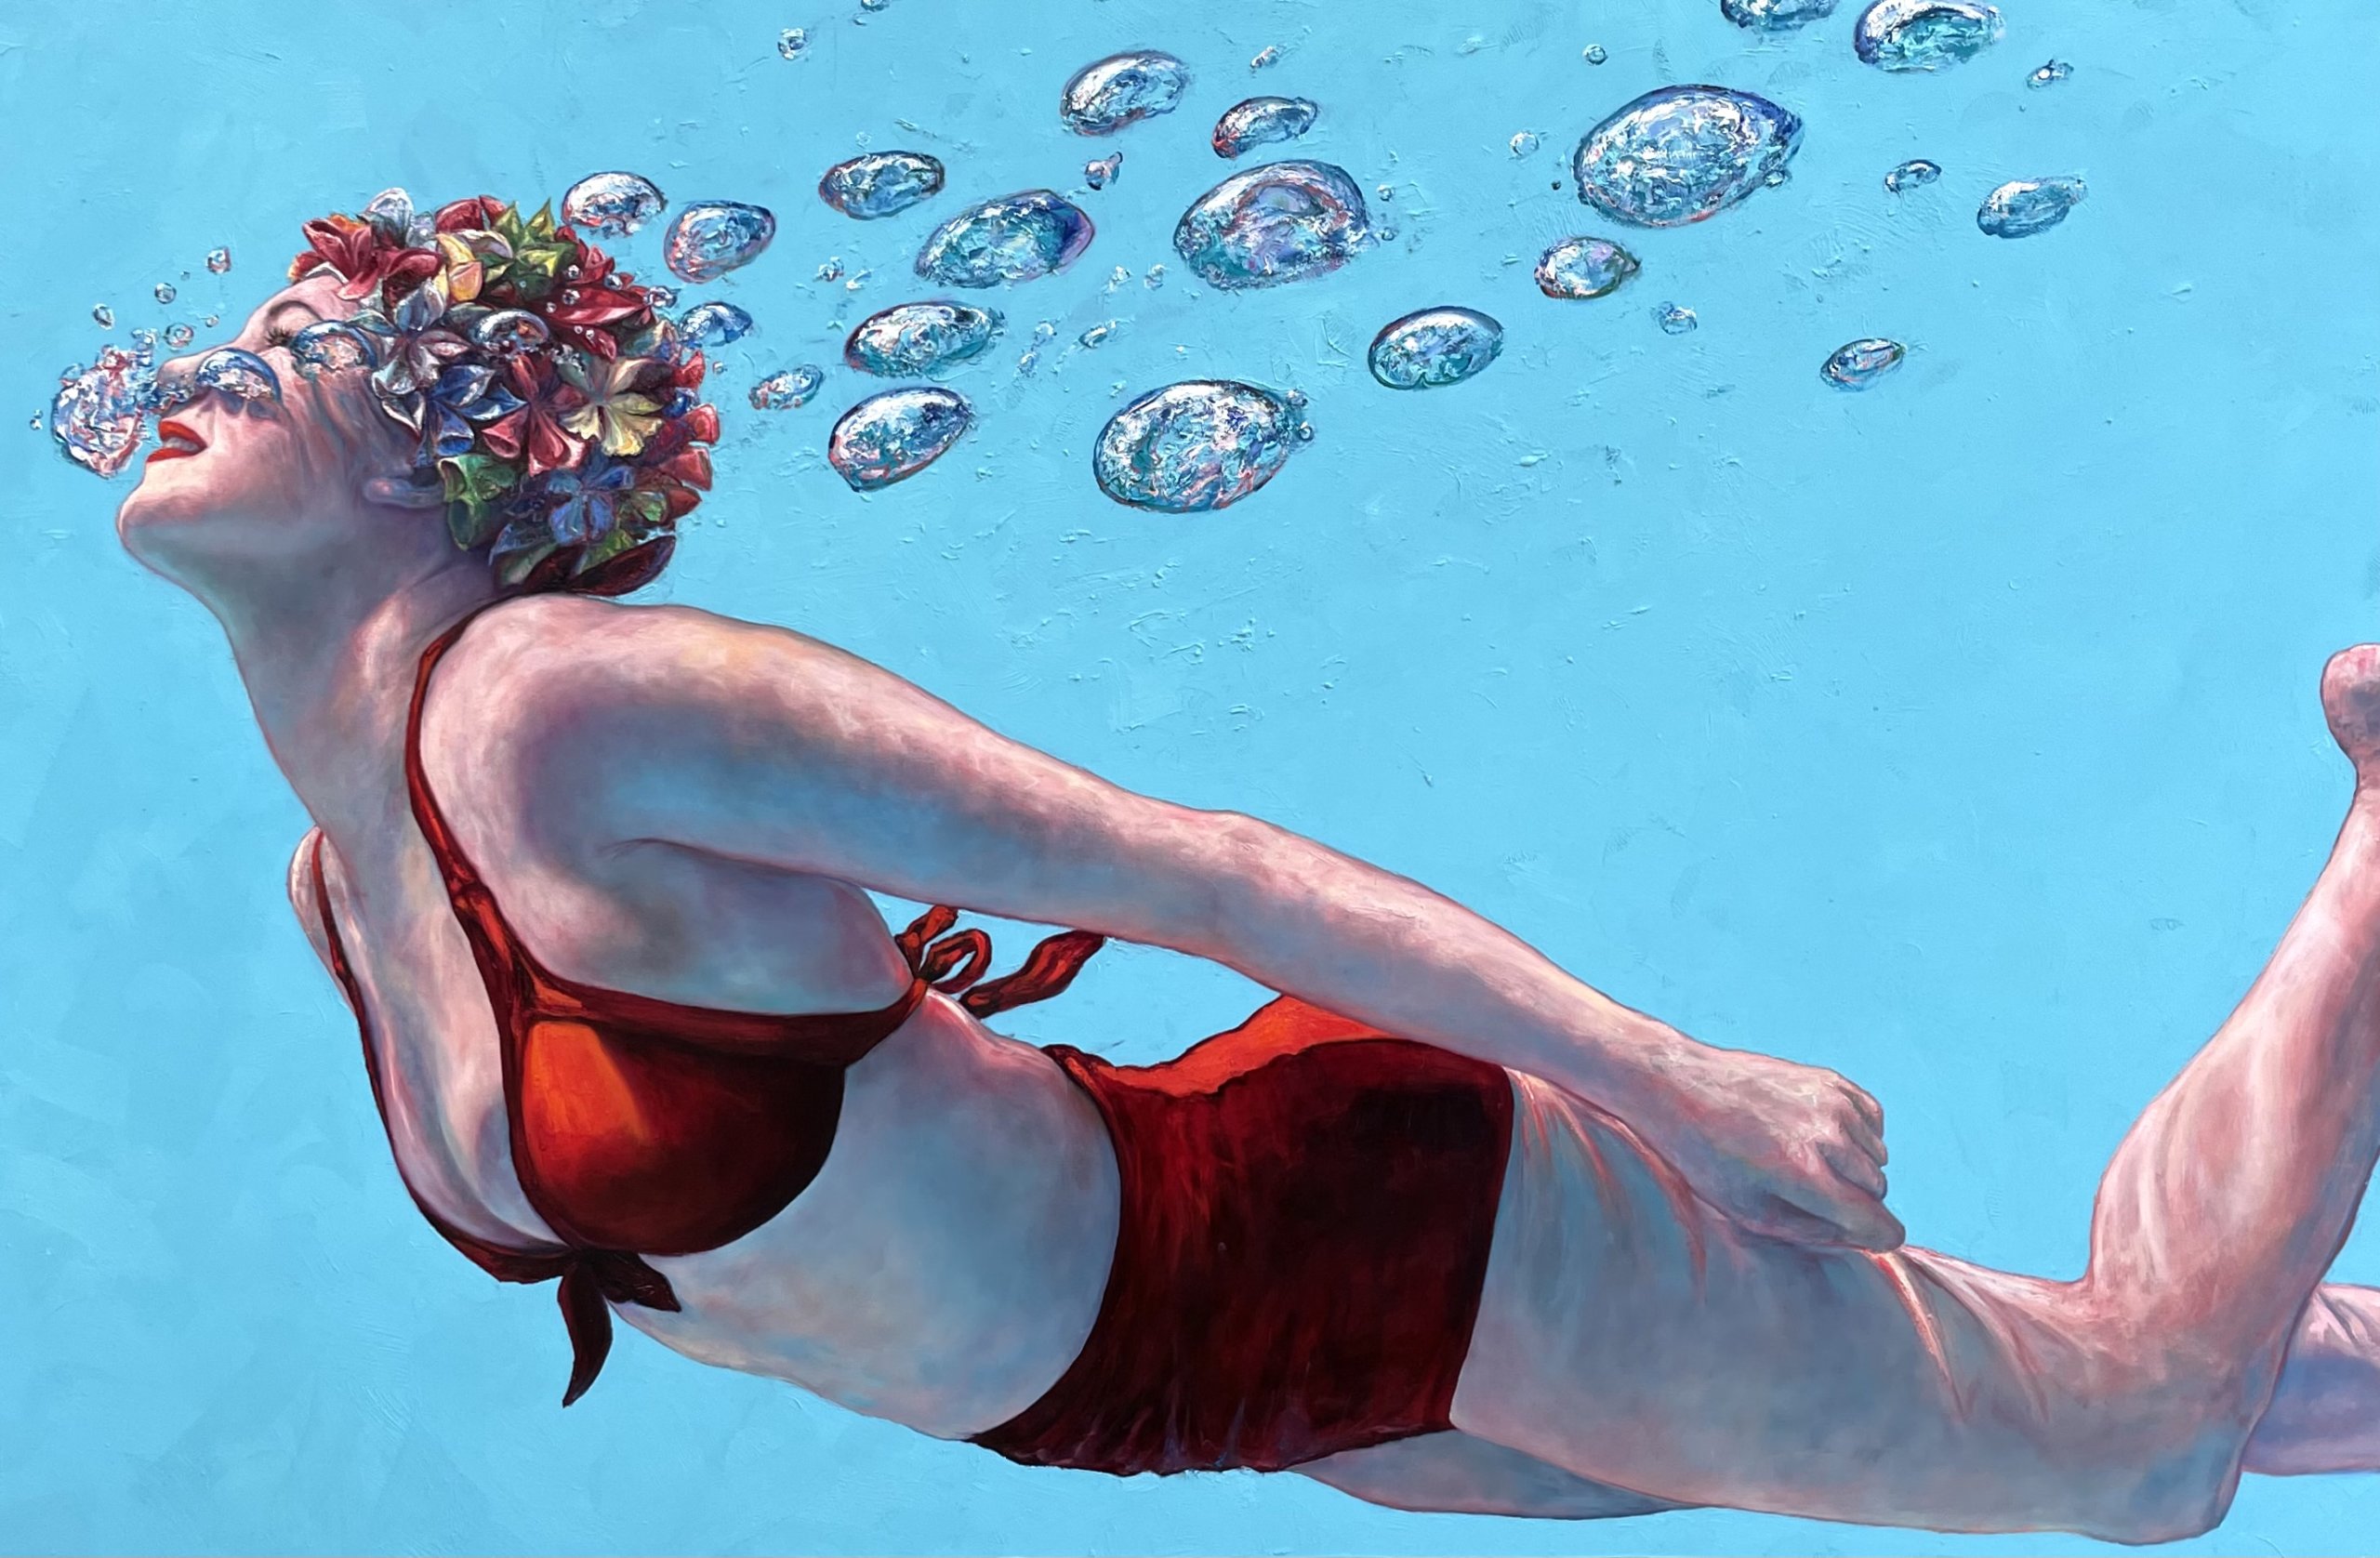 One of Jennifer Hannaford's iconic swimmer paintings